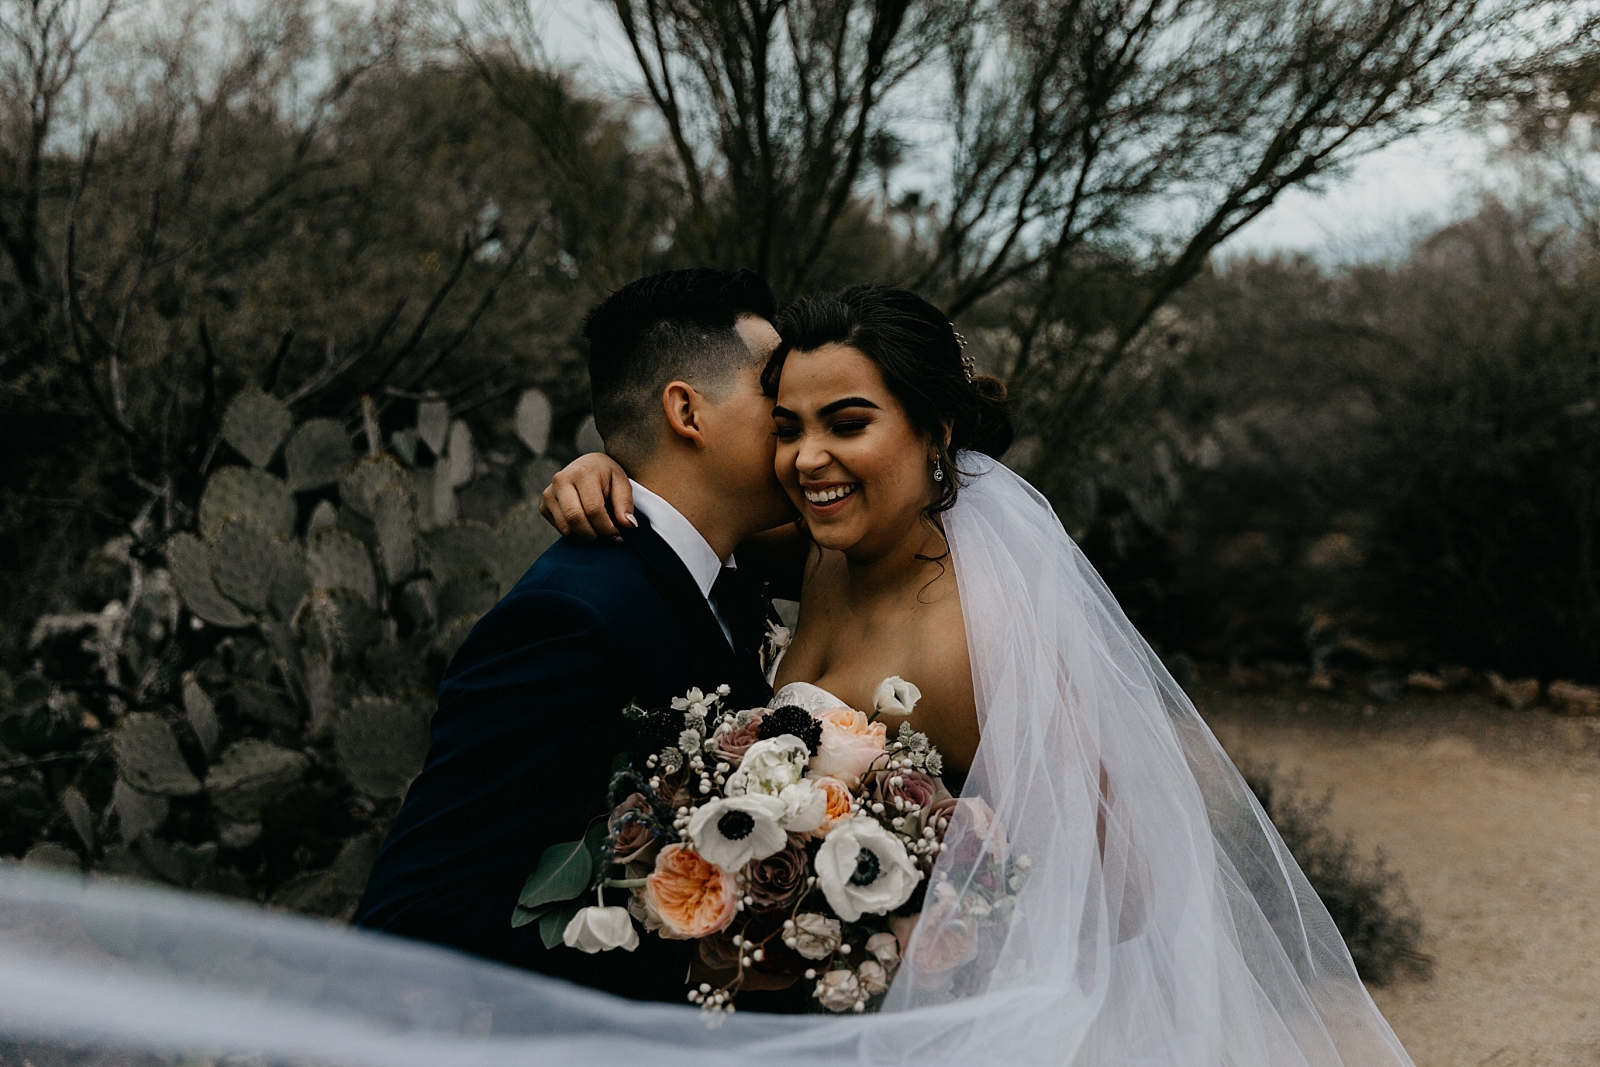 Desert Bride and groom pictures with flying veil Tucson AZ Wedding Photographer Samantha Patri Photography